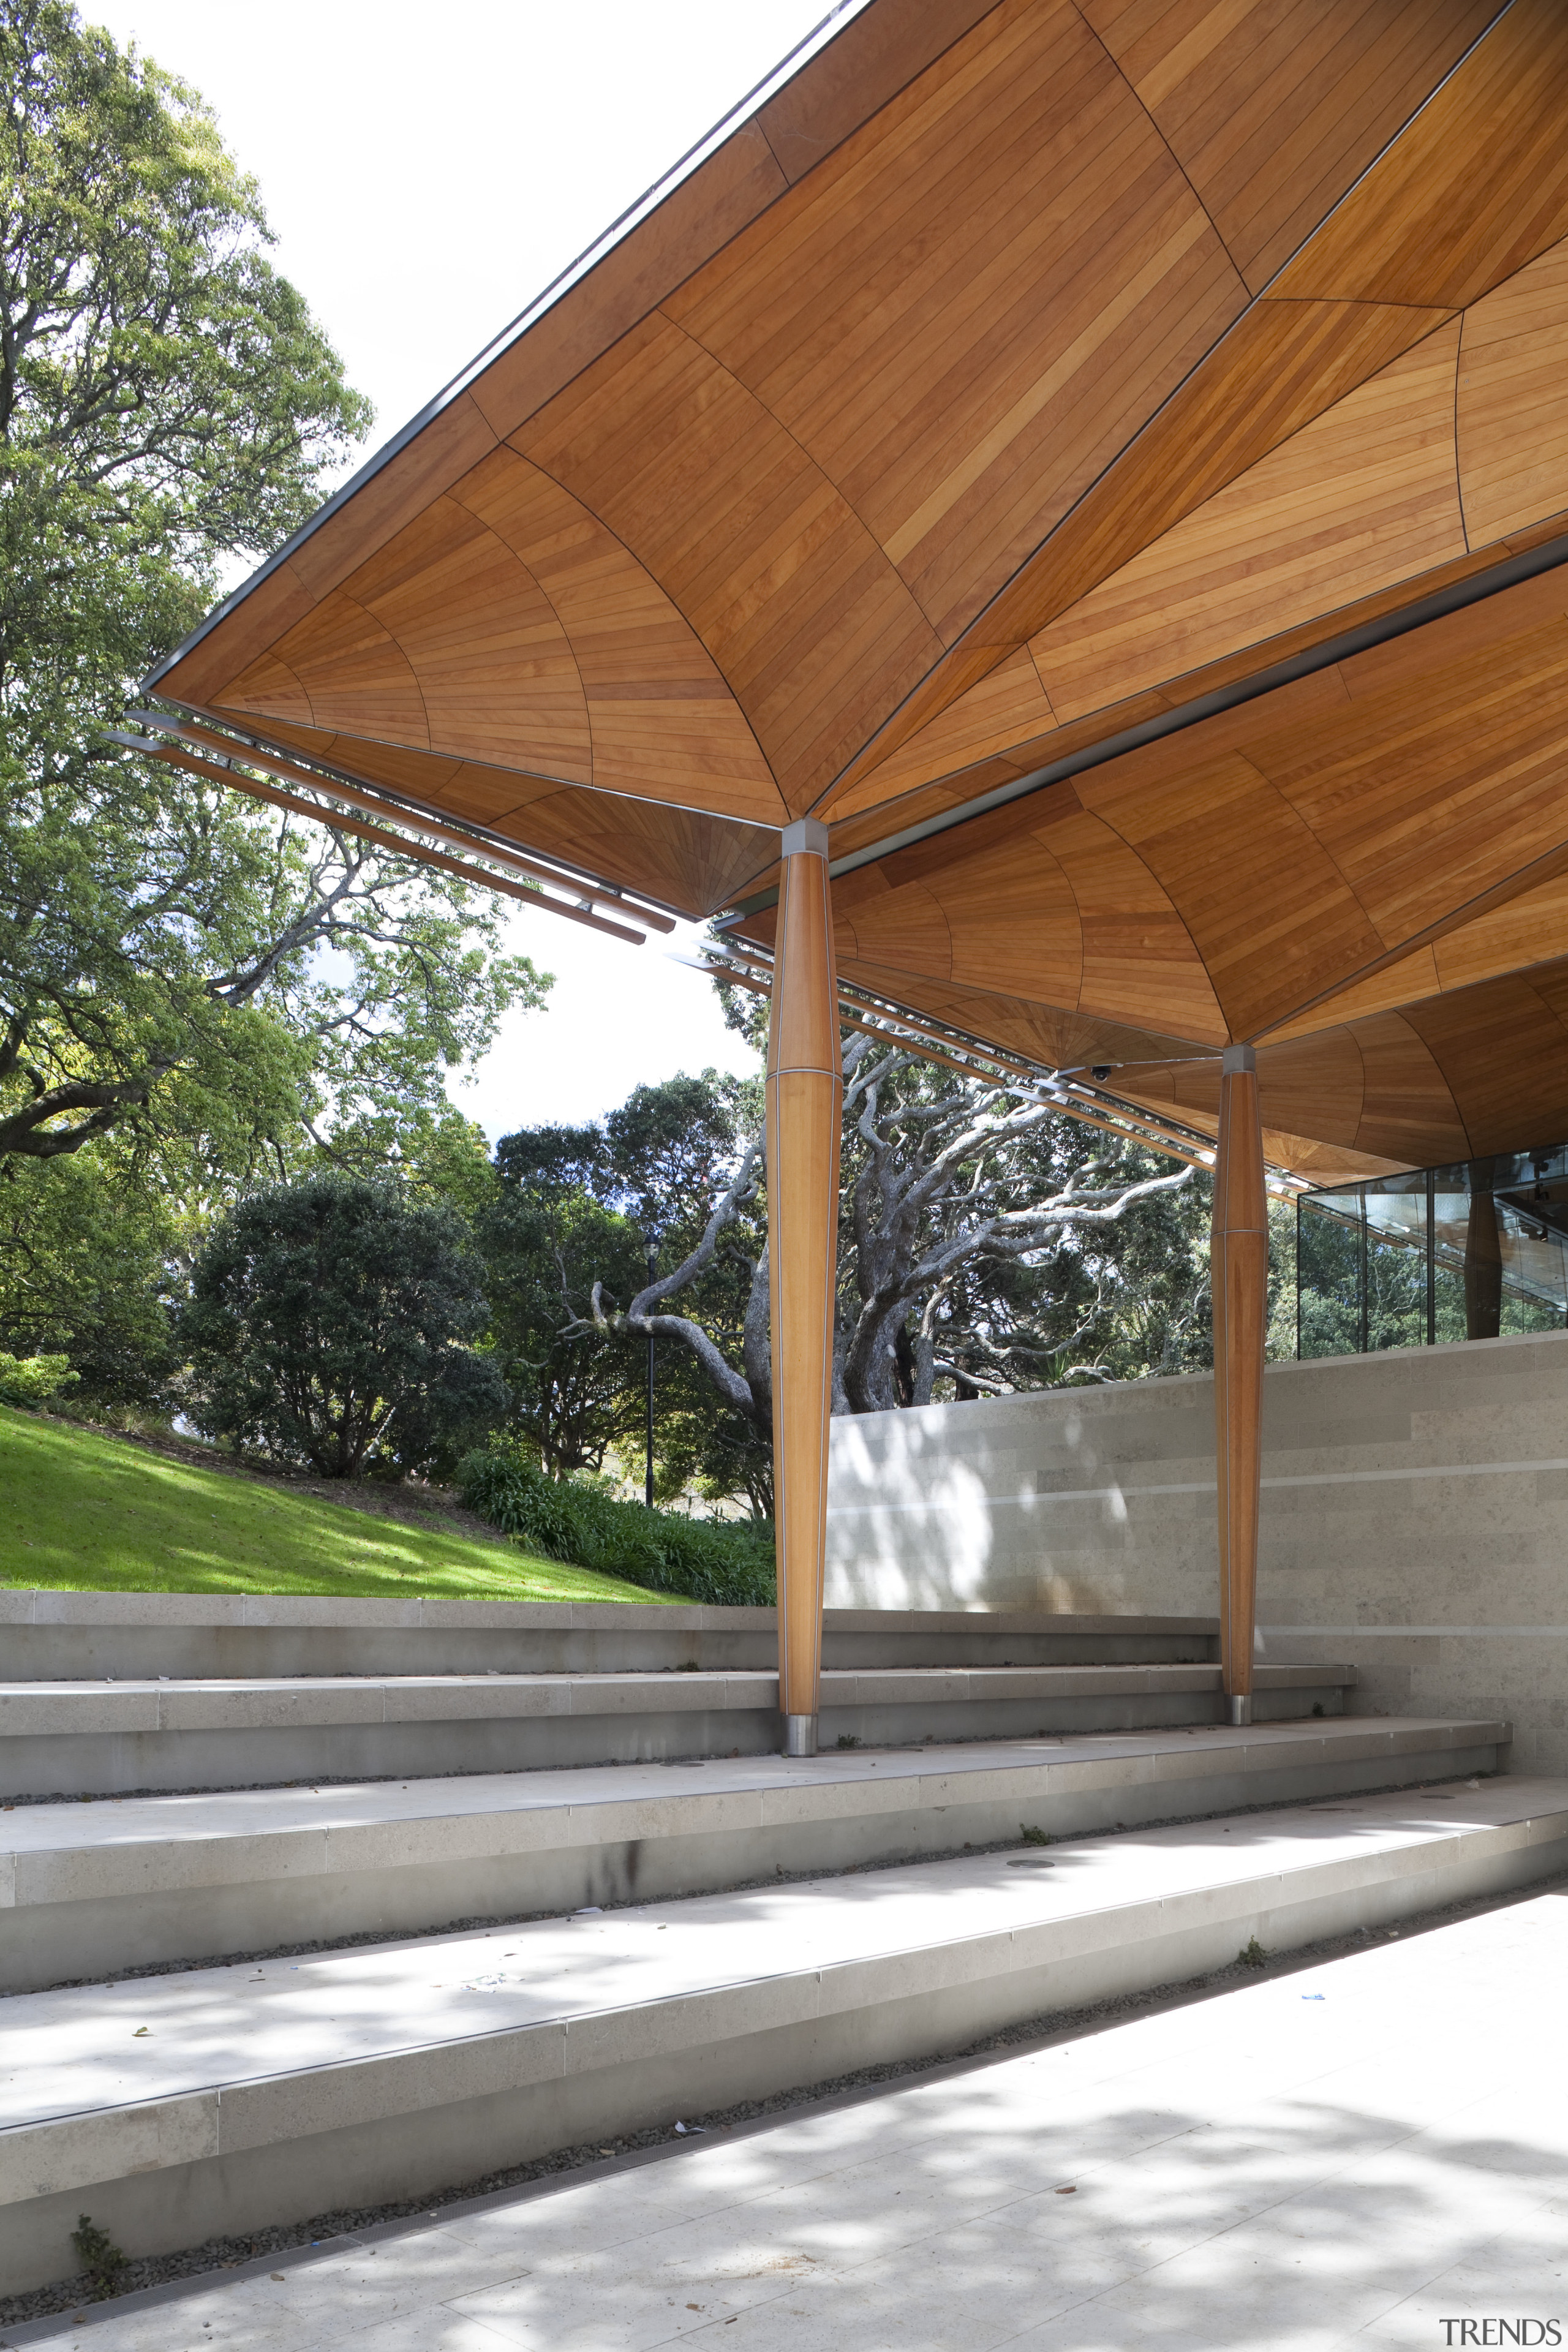 Exterior of Auckland Art Gallery, showing stainless facade. architecture, house, outdoor structure, pavilion, roof, structure, wood, brown, gray